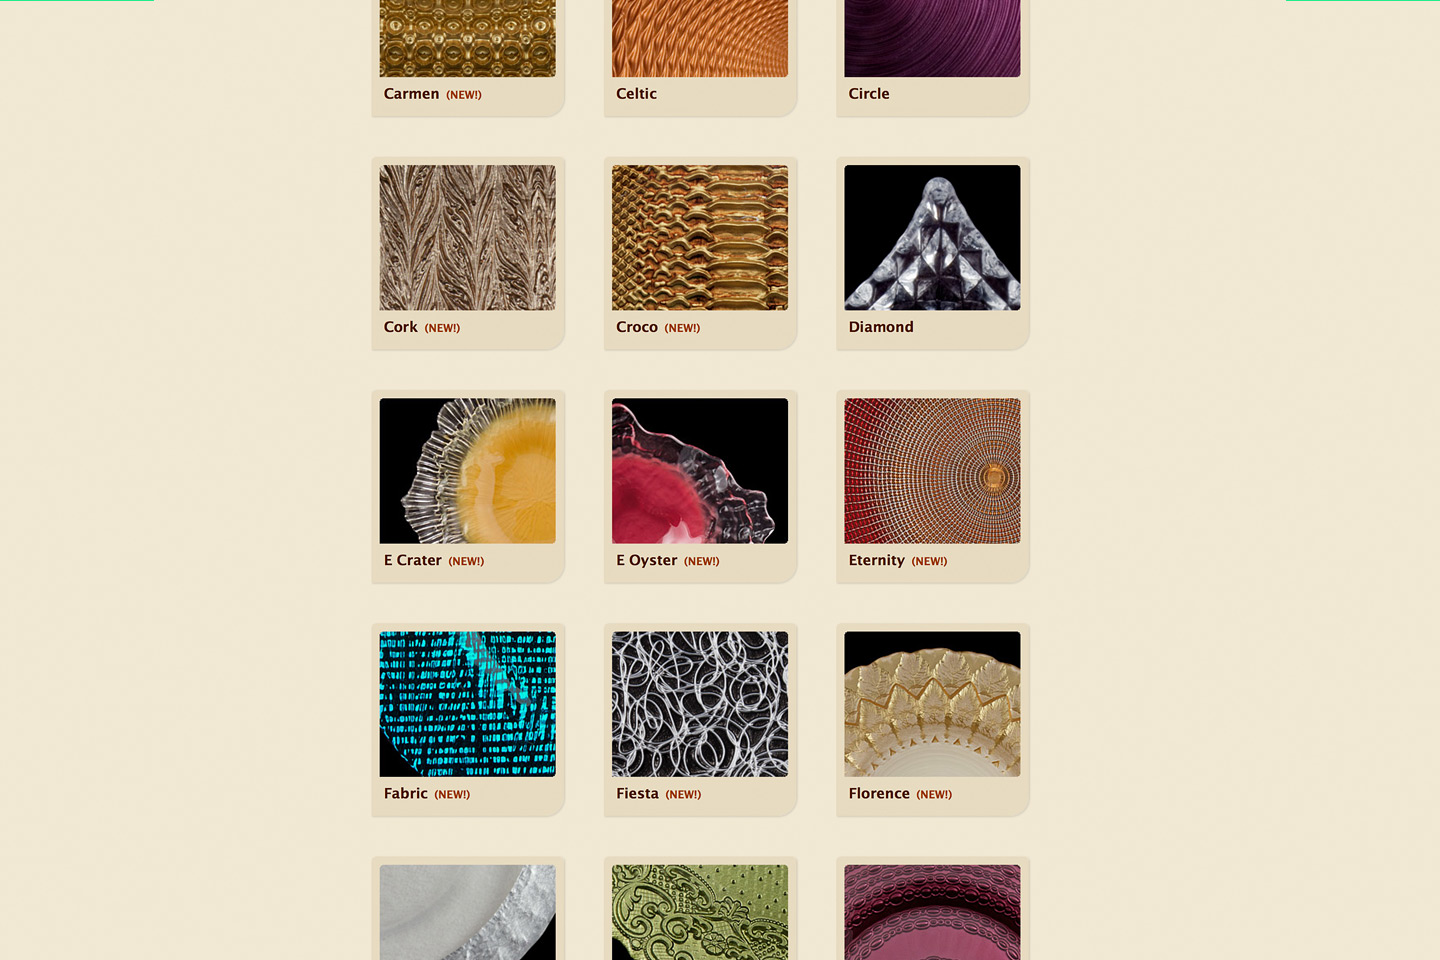 a screen capture of the mandarin orange trading company new collections chargers family, featuring thumbnails of all the new collections charger patterns